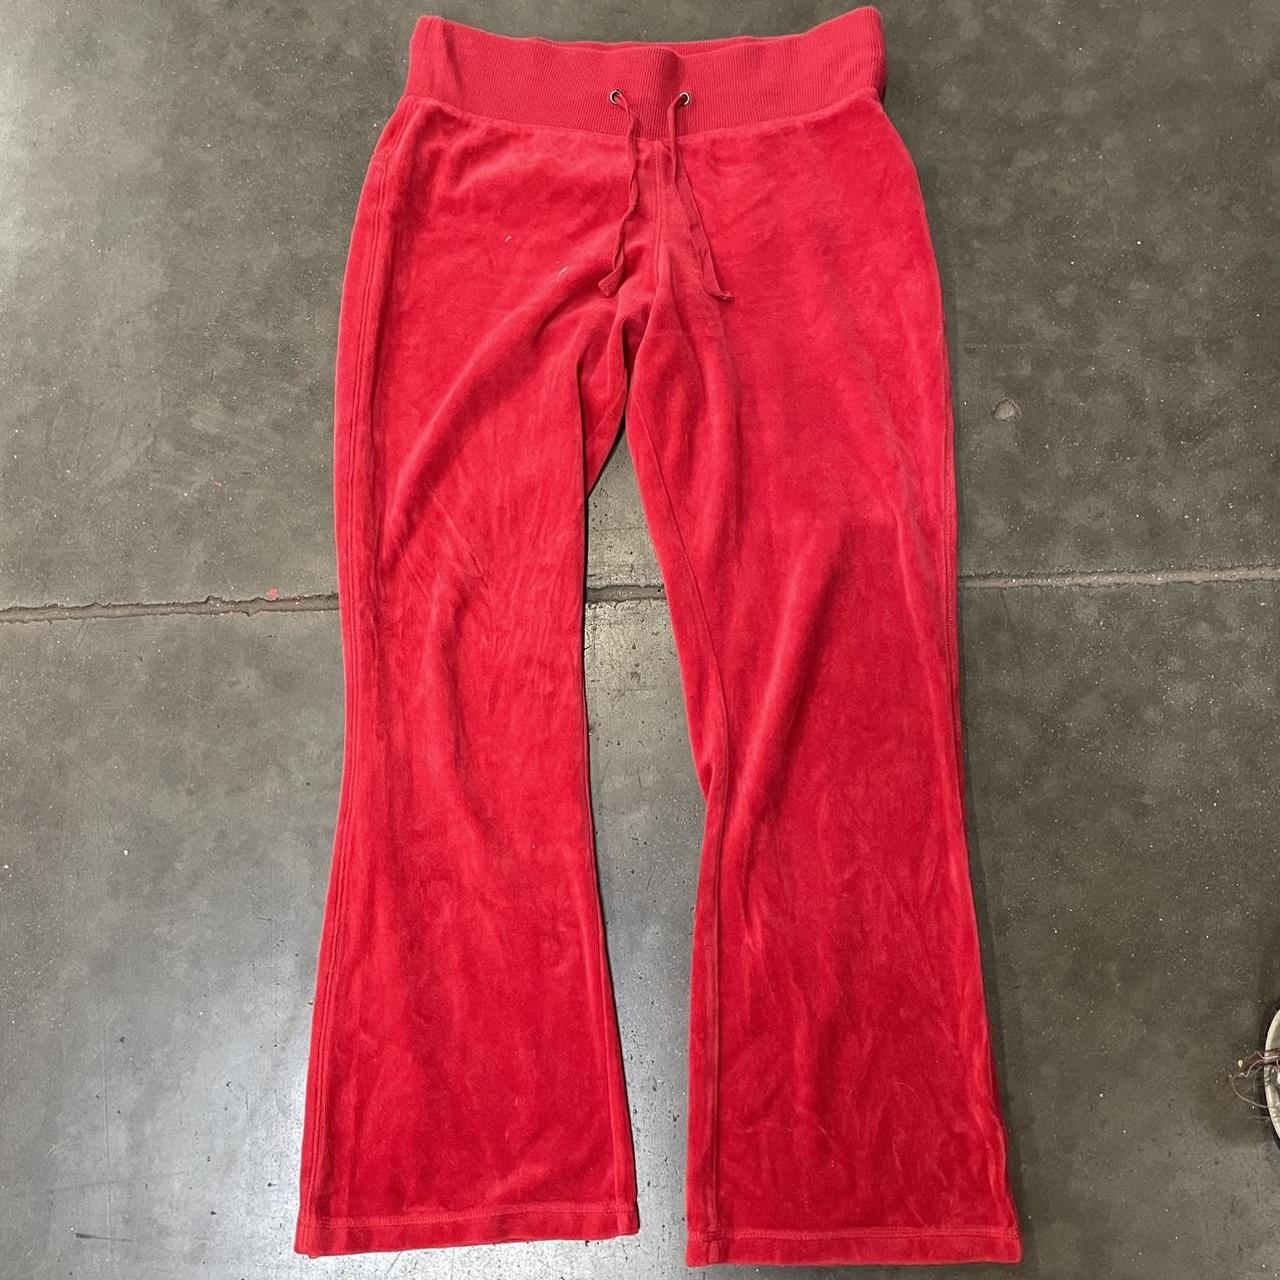 red flare yoga pants - size medium - great condition - Depop